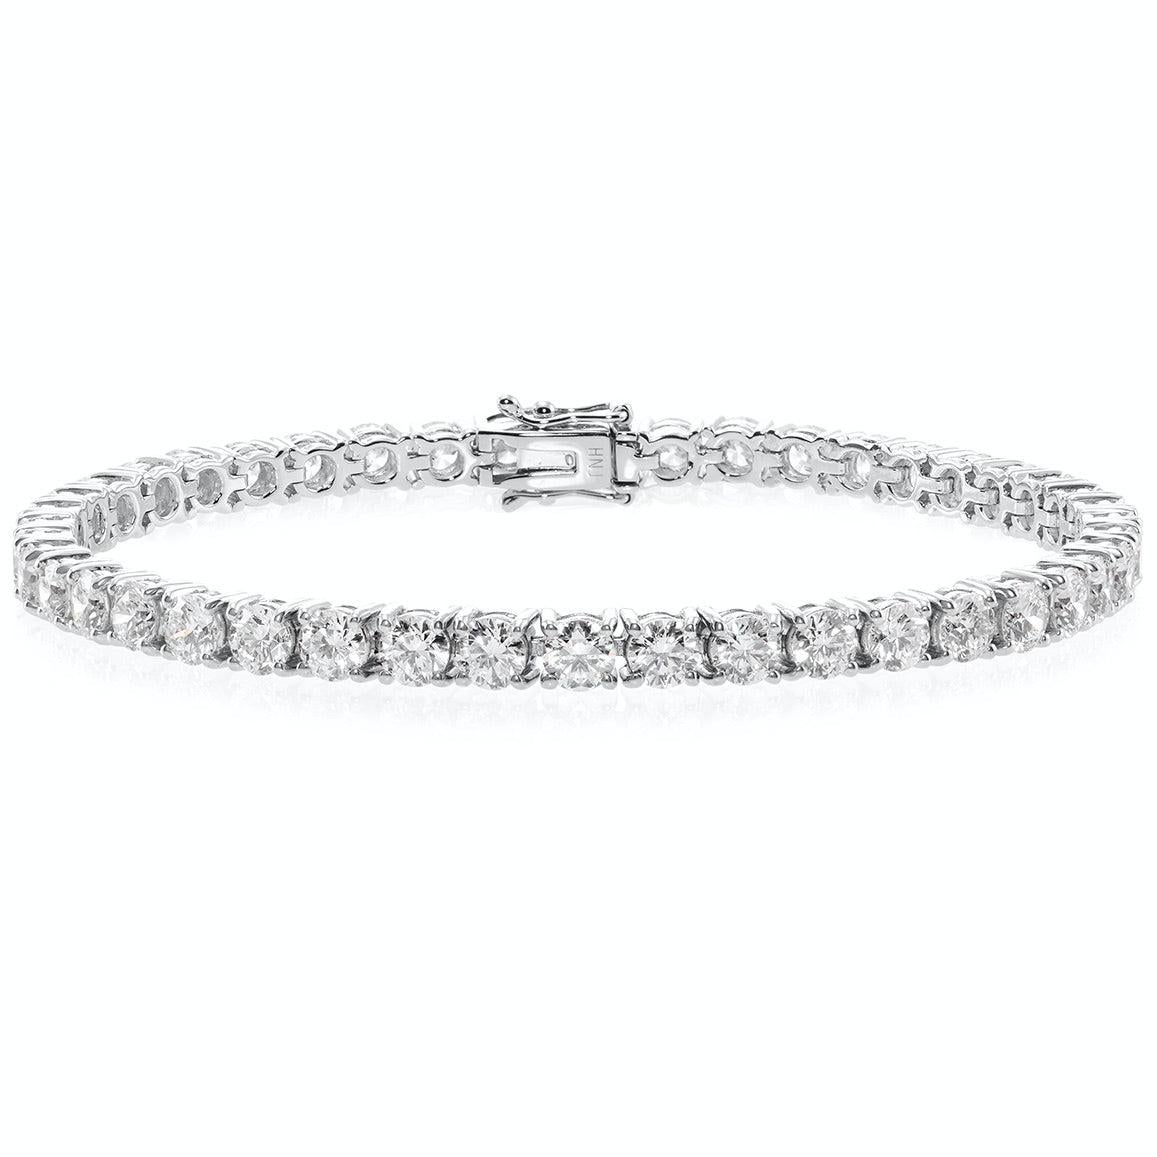 Every girl needs a tennis bracelet! We make them in all diamond sizes. This one has 7.78cts of diamonds (0.222ct each stone) and is in white gold.

The 4-prongs set diamond bracelets are the perfect complement to your everyday jewelry collection and